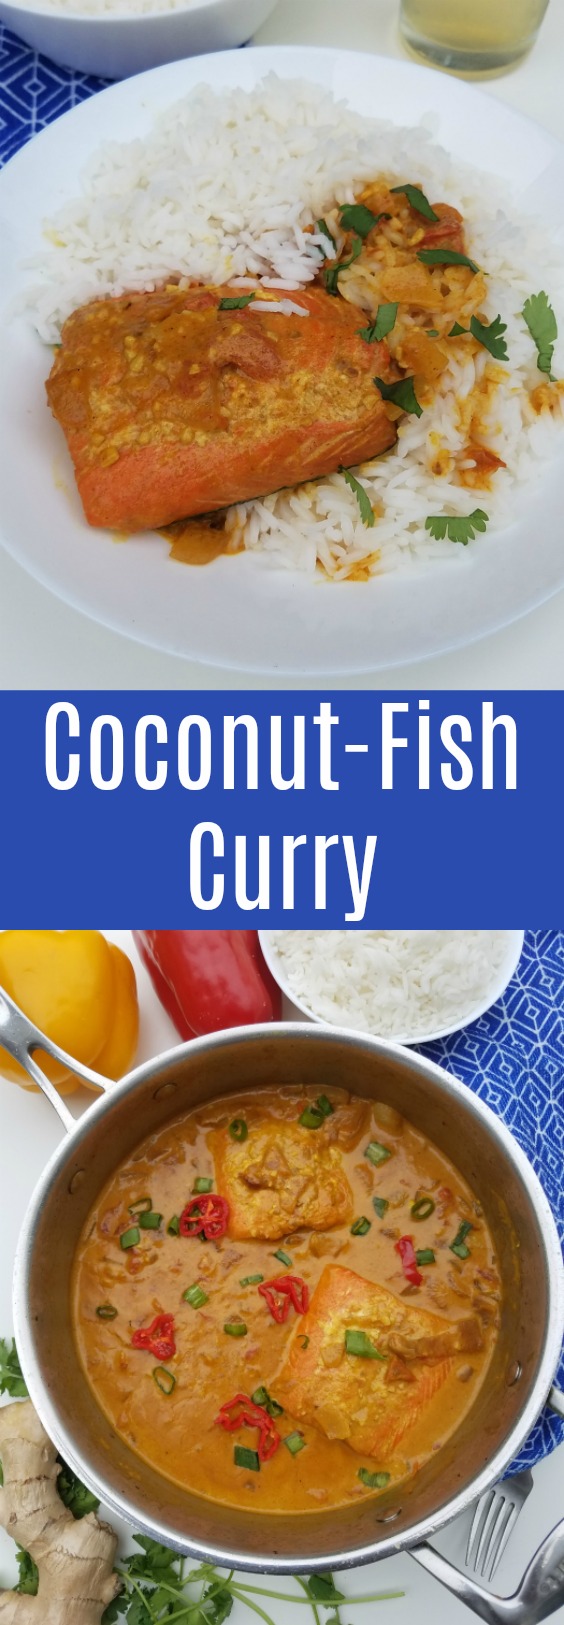 Curry in a hurry. Add this easy coconut fish curry recipe to your menu. Great for a dinner ready in less than 30 minutes @Alaska Seafood #AskForAlaska #IC (ad)